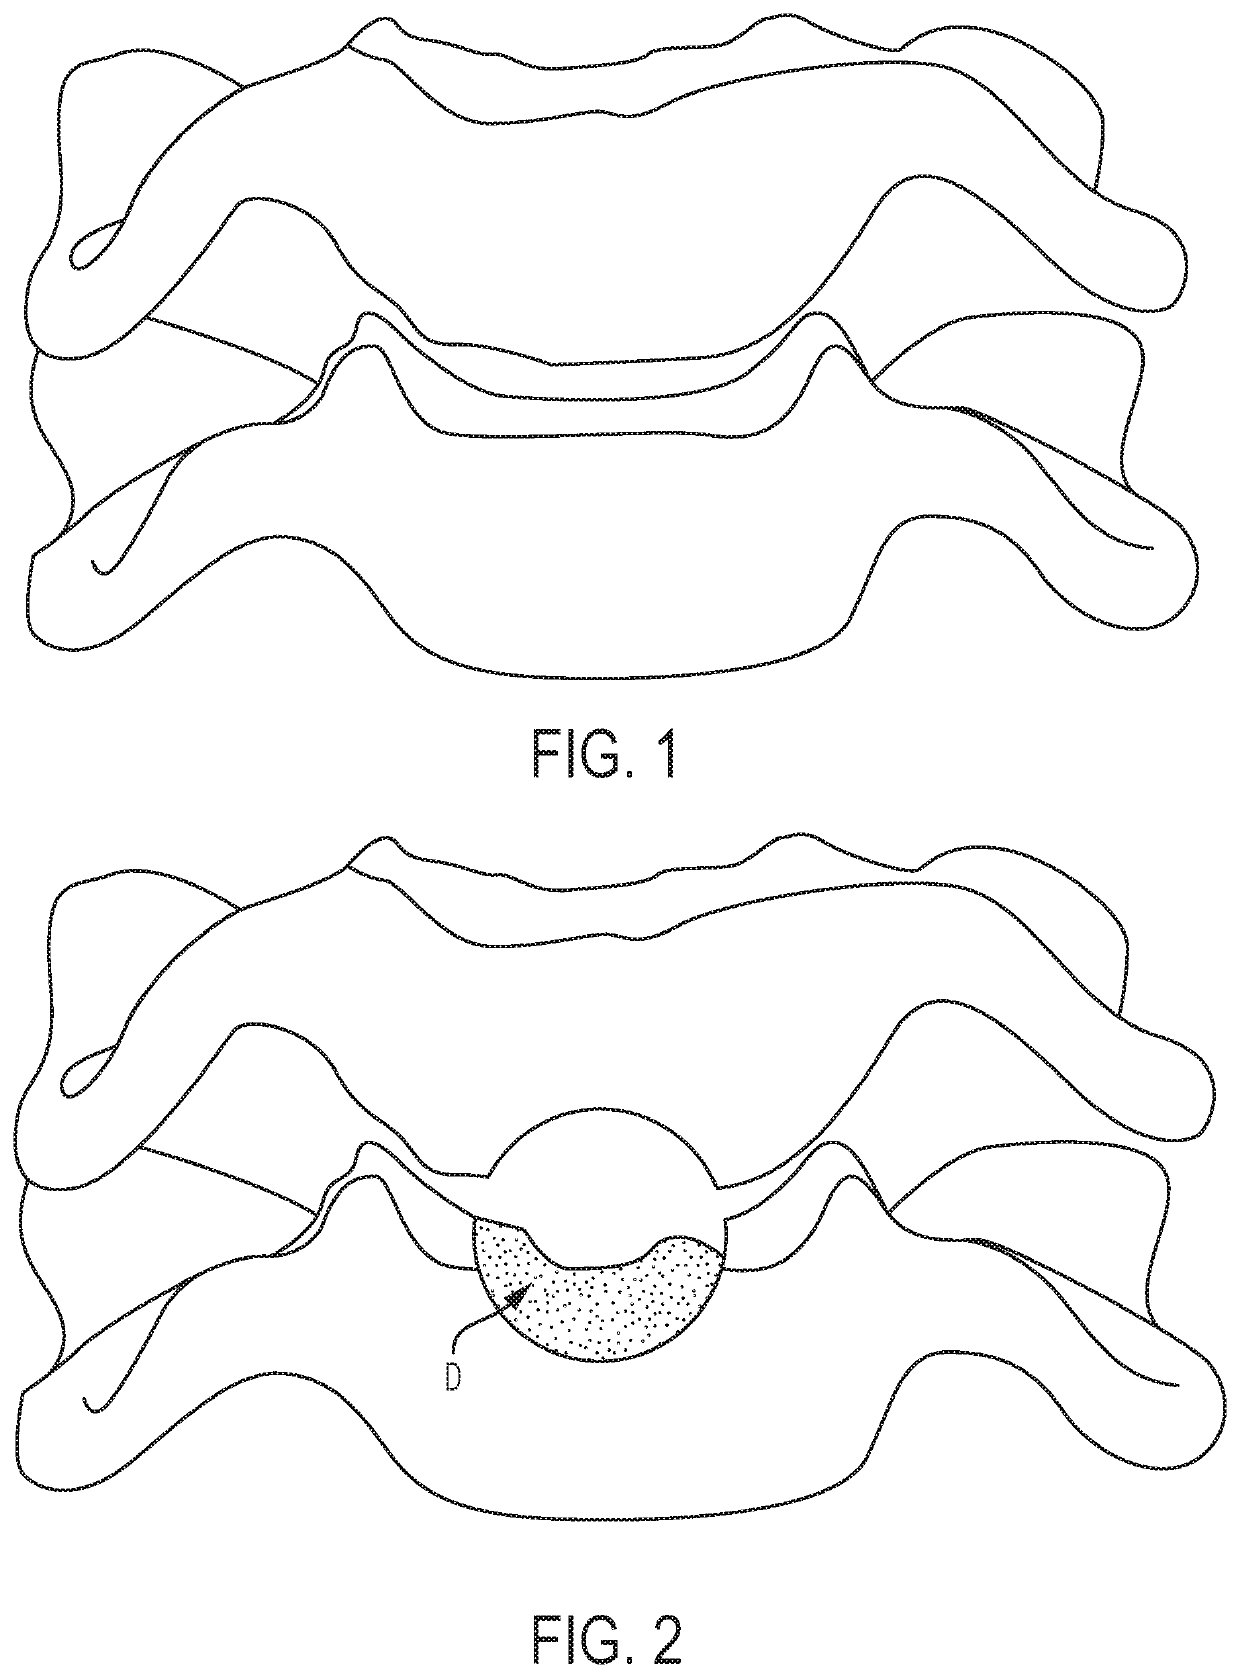 Cloward-style cervical mesh cage with lateral stabilizers